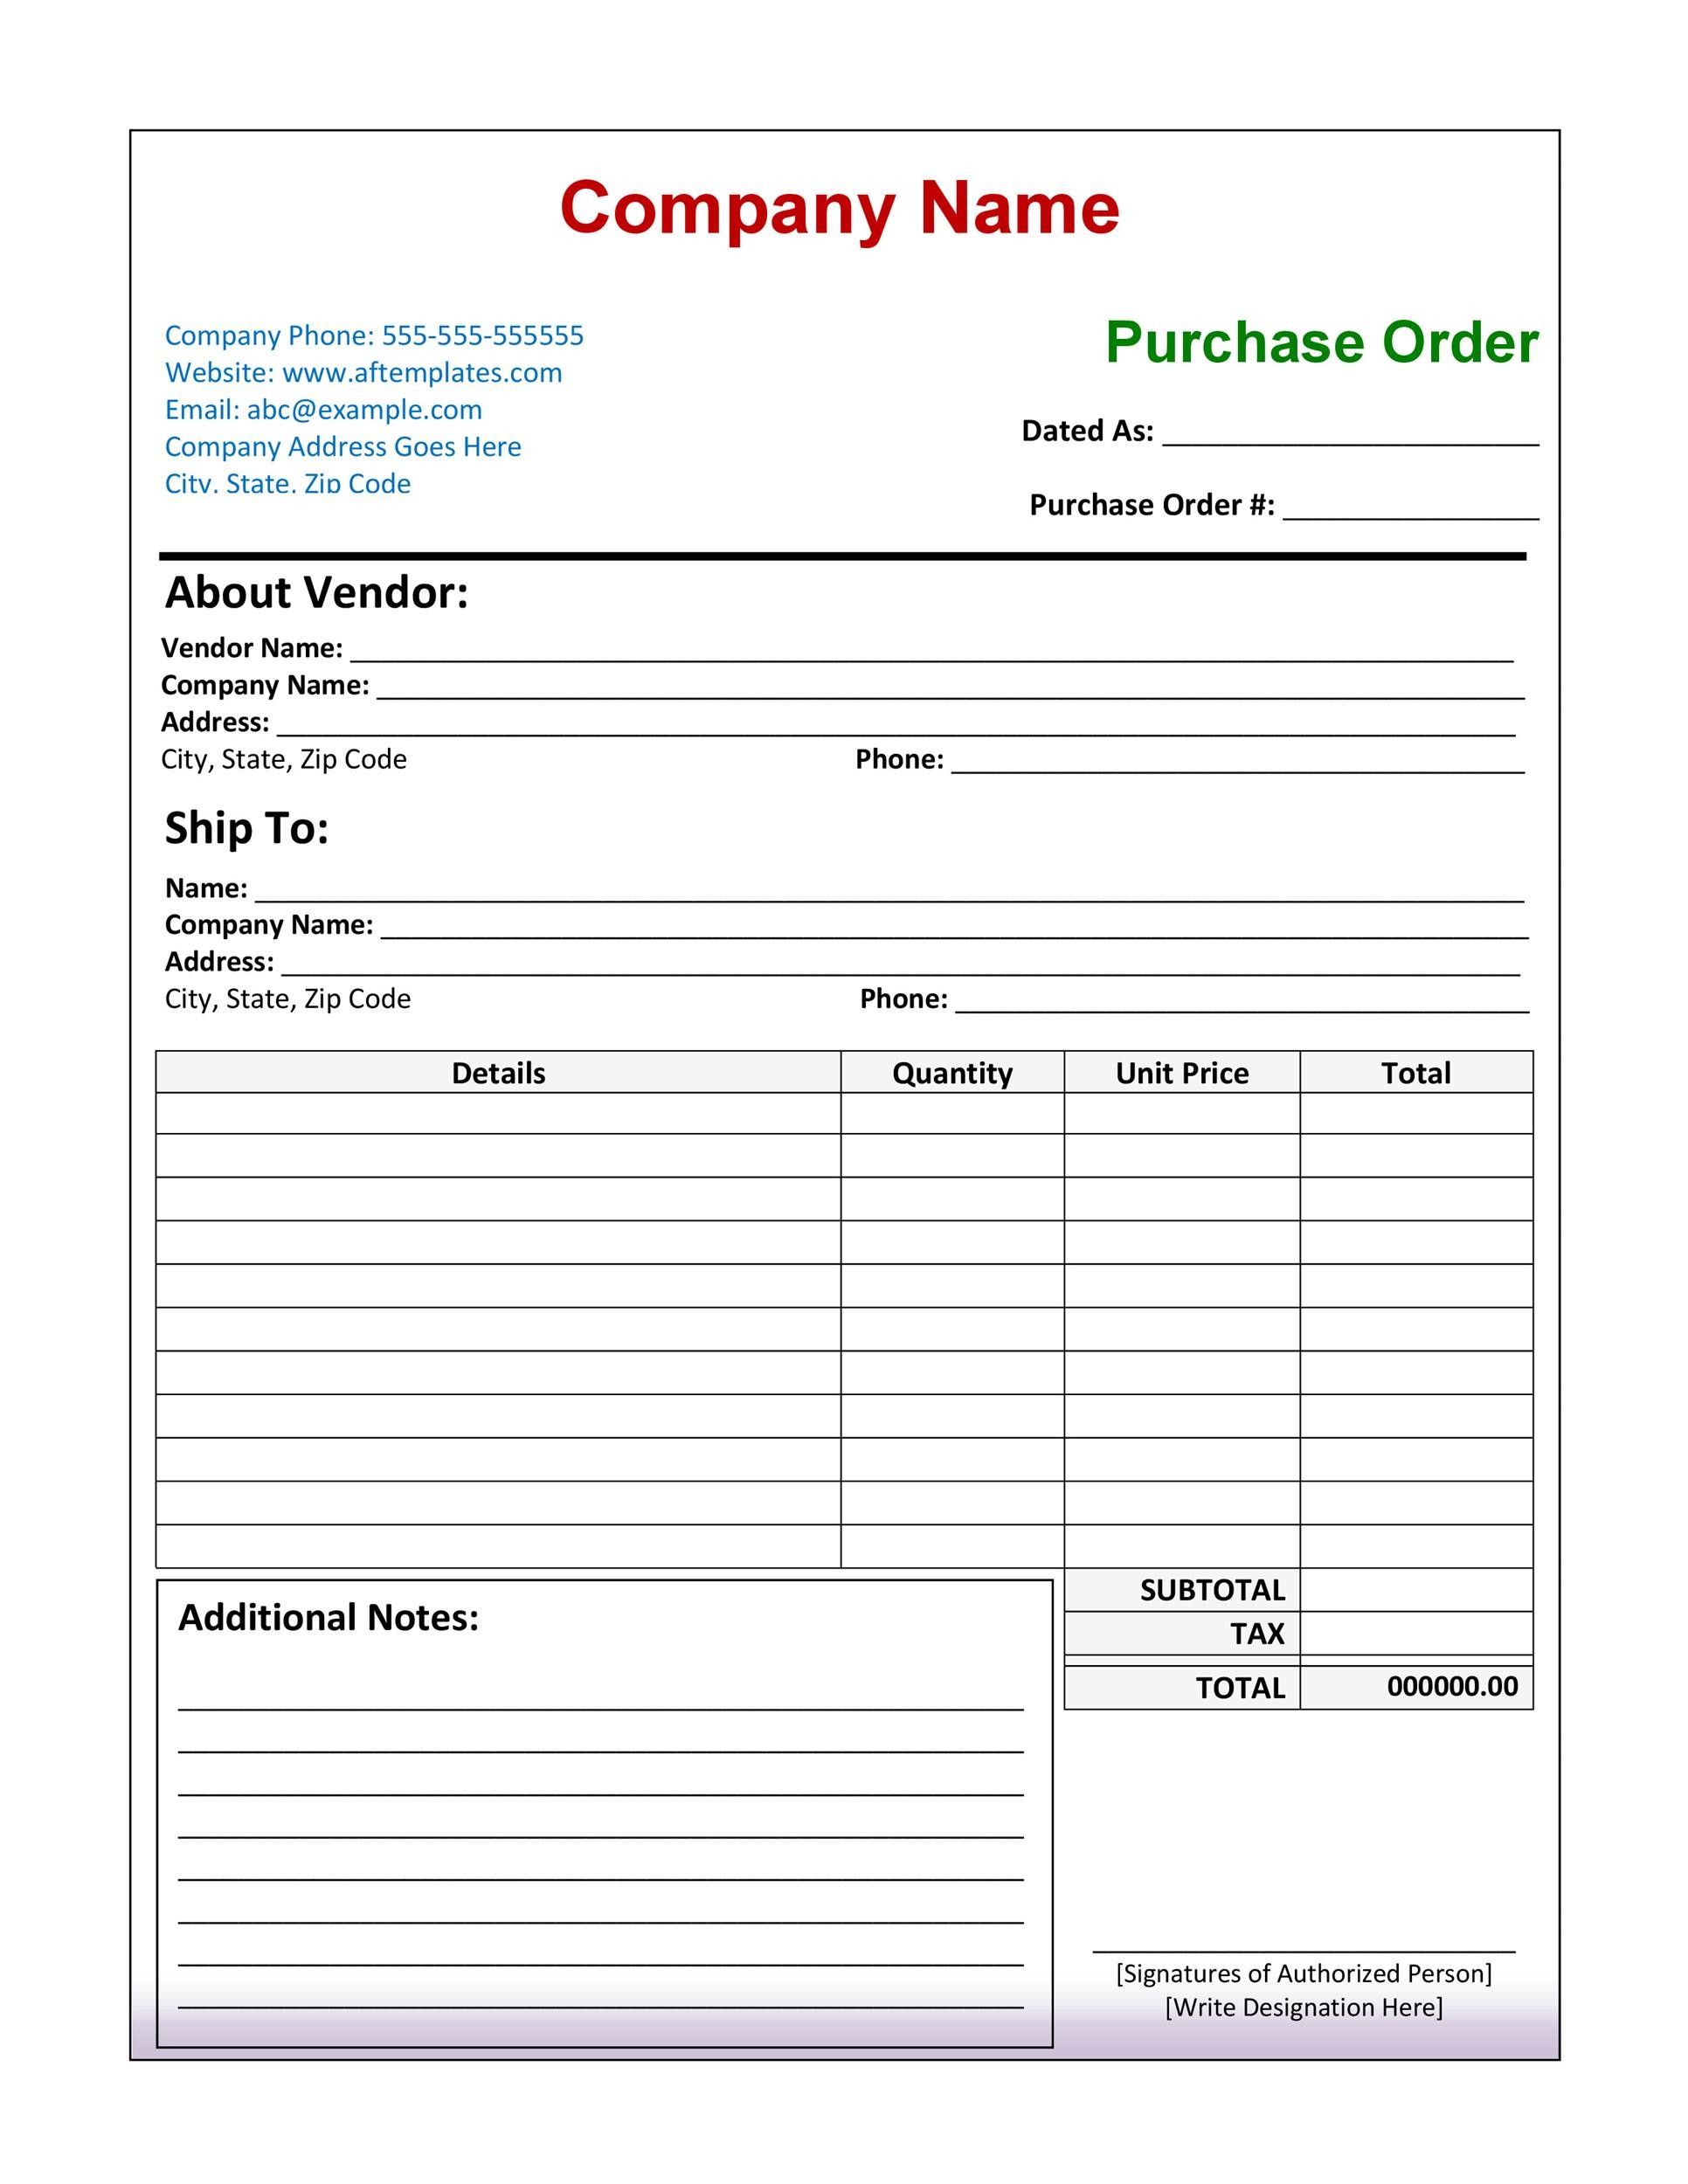 purchase-order-request-form-template